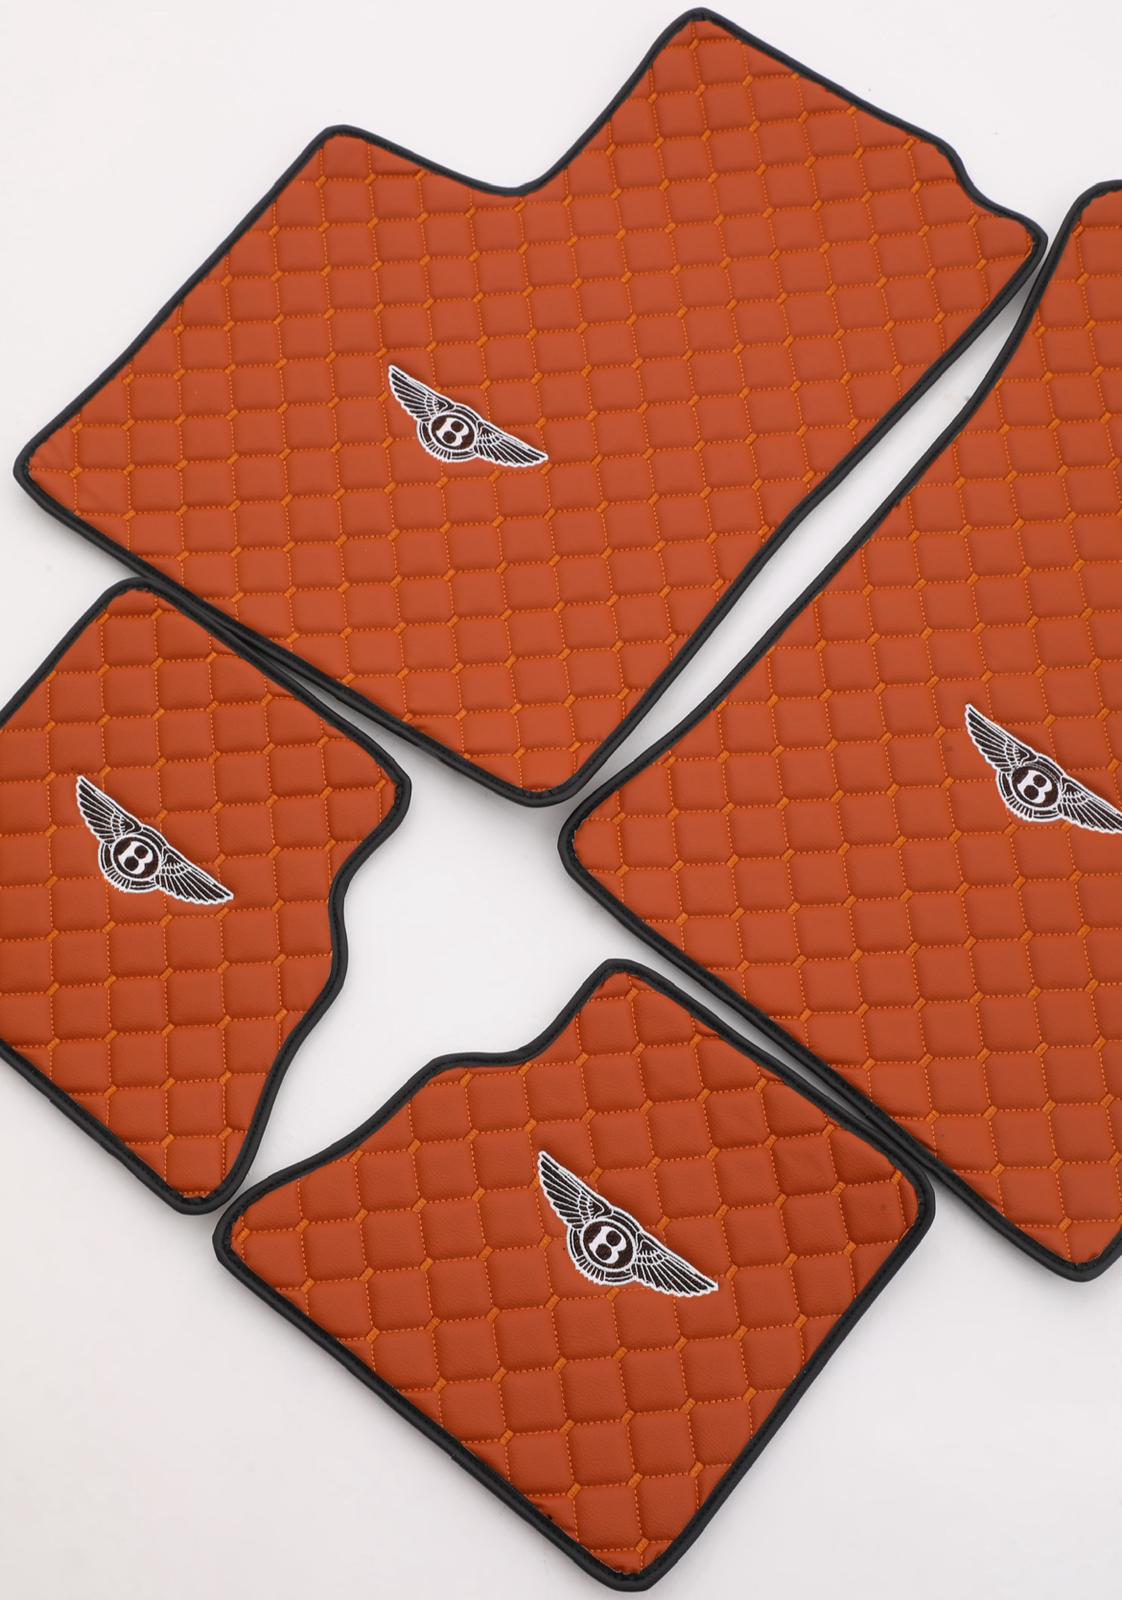 Bentley Continental GT Coupe 2011-Onwards Special Design Leather Custom Car Mat